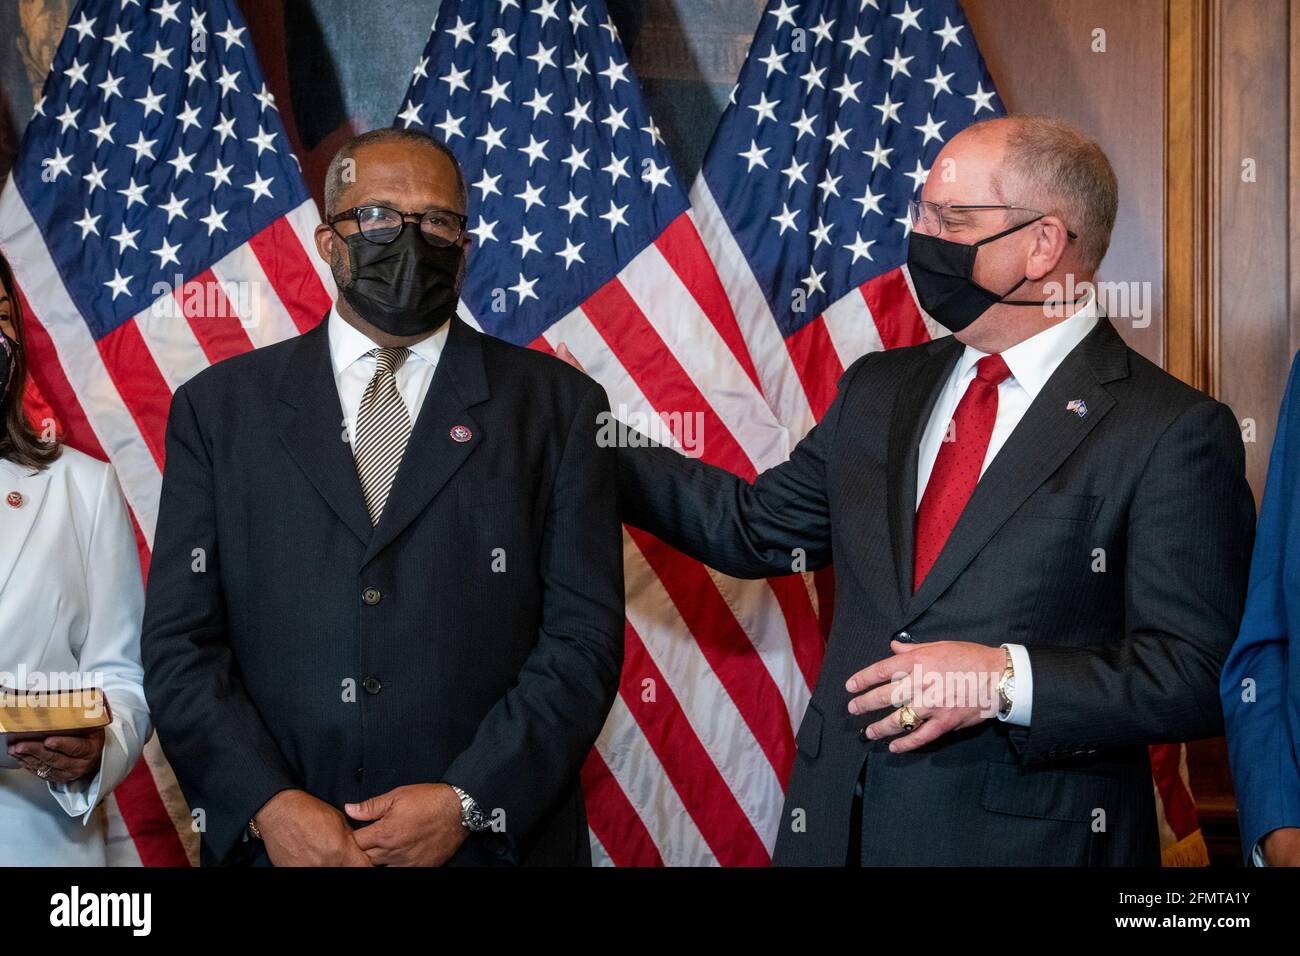 Washington, United States Of America. 11th May, 2021. United States Representative Troy Carter (Democrat of Louisiana), left, is joined by Louisiana Gov. John Bel Edwards, right, during his ceremonial swearing-in by Speaker of the United States House of Representatives Nancy Pelosi (Democrat of California) at the US Capitol in Washington, DC, Tuesday, May 11, 2021. Credit: Rod Lamkey/CNP | usage worldwide Credit: dpa/Alamy Live News Stock Photo